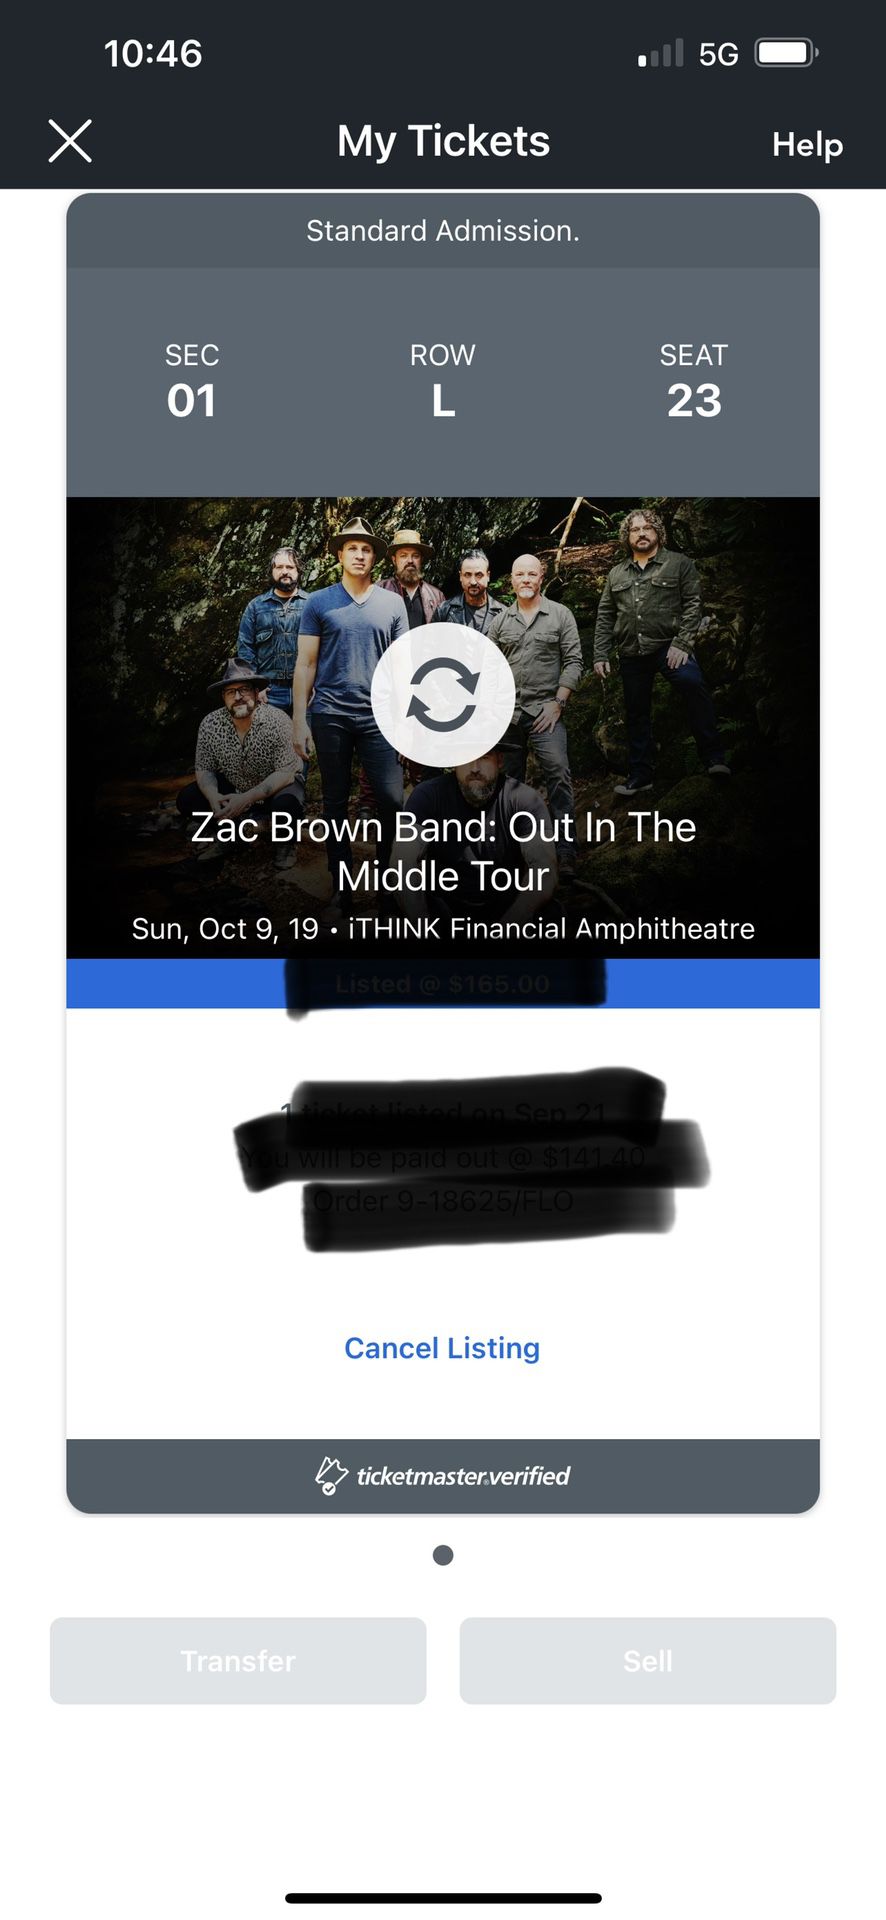 Zac Brown Band Ticket